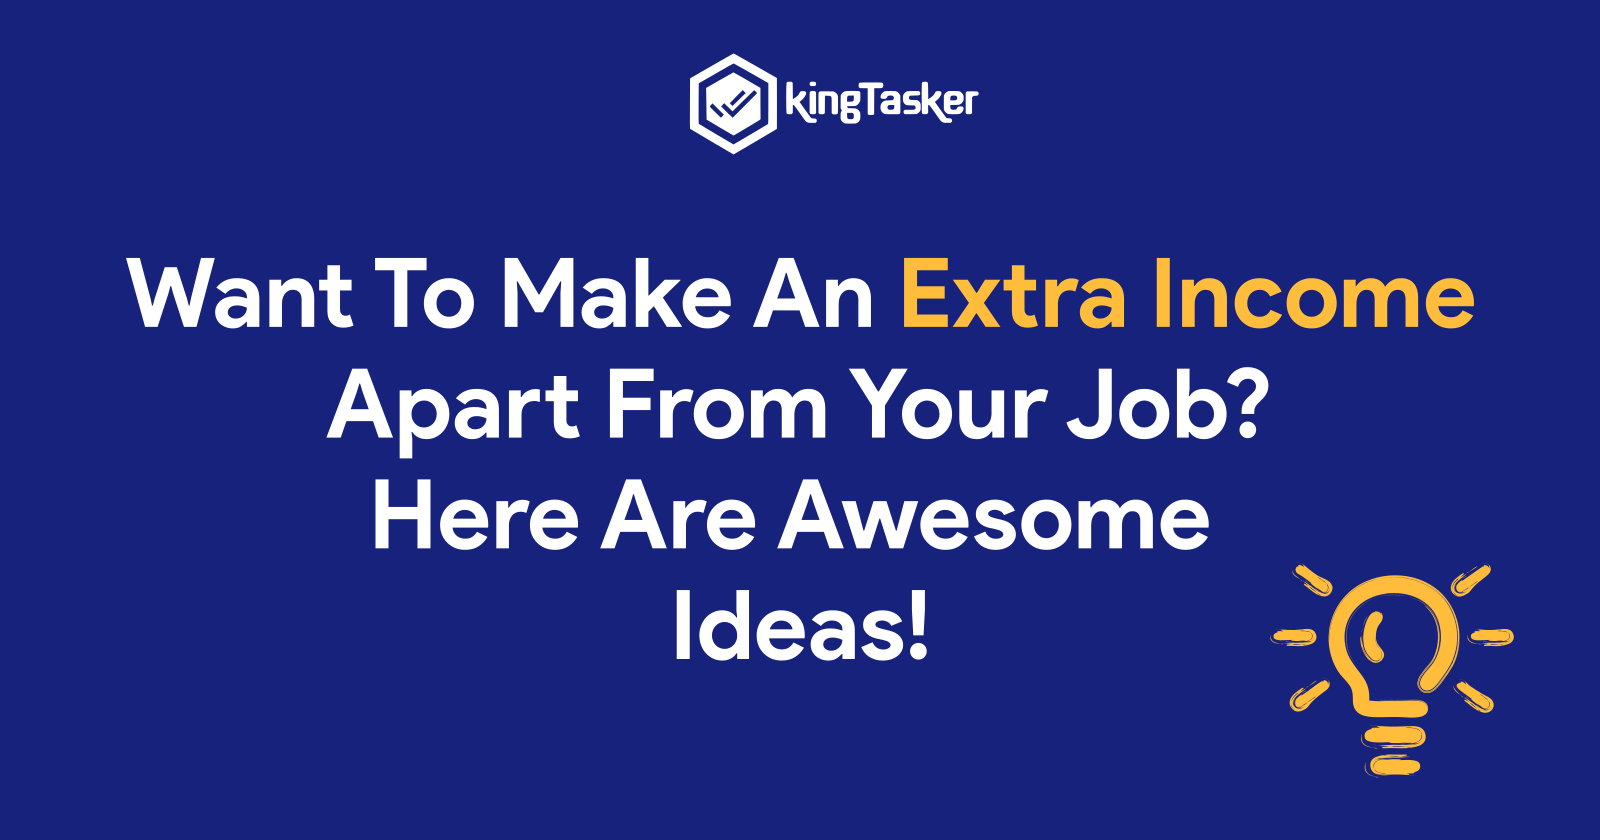 Want To Make An Extra Income Apart From Your Job? Here Are Awesome Ideas!